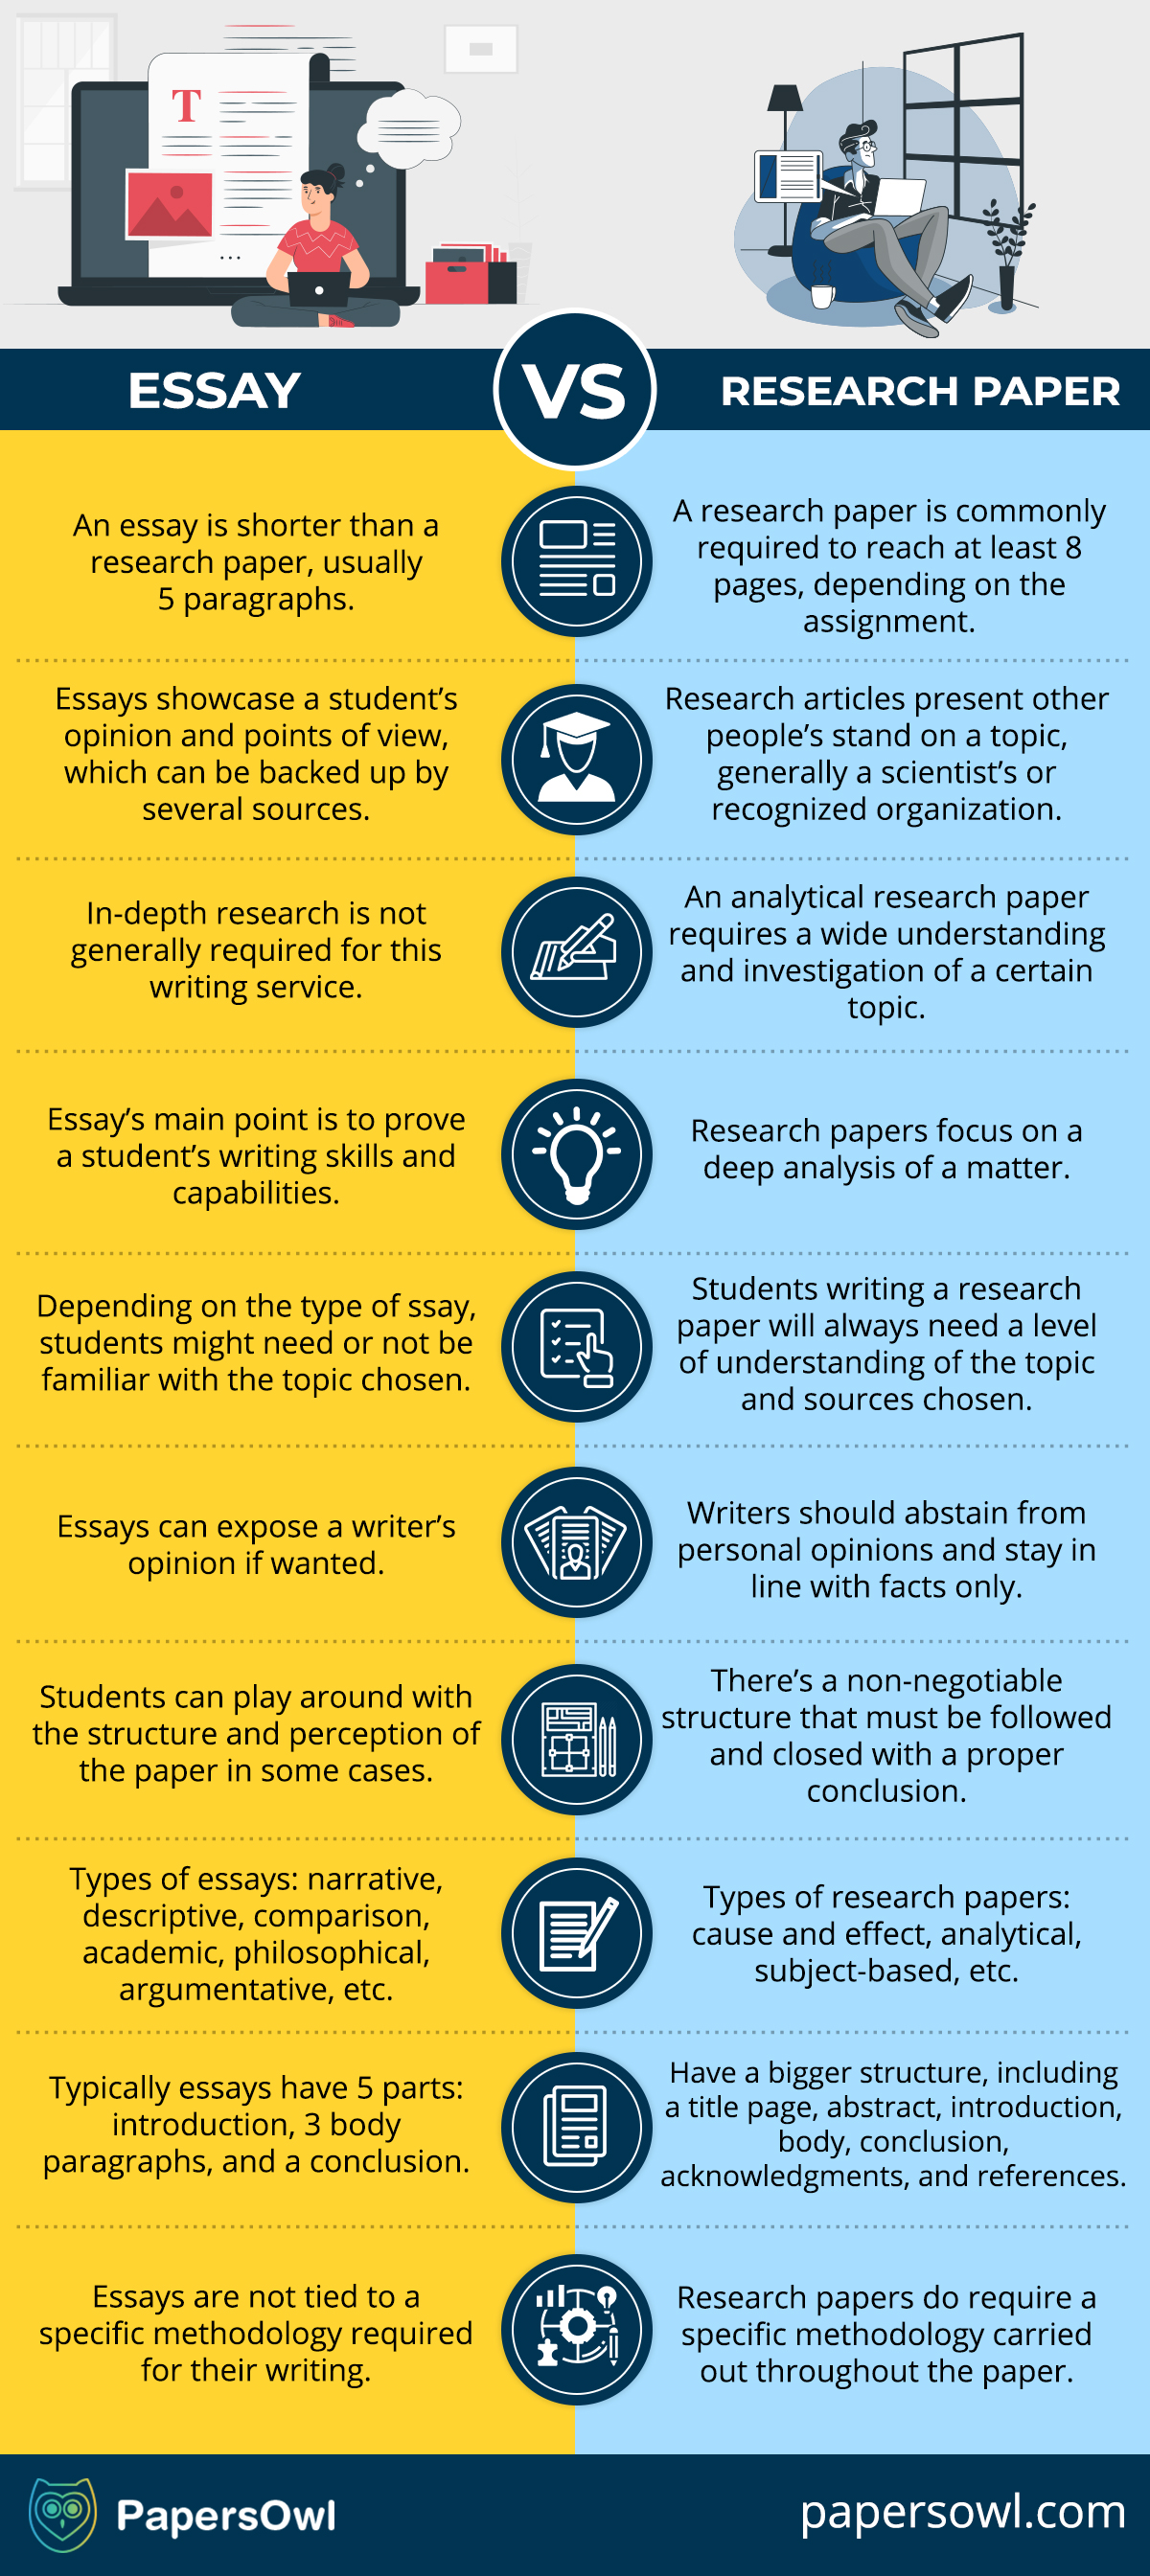 What kind of sources should not be used in a research paper? Essay